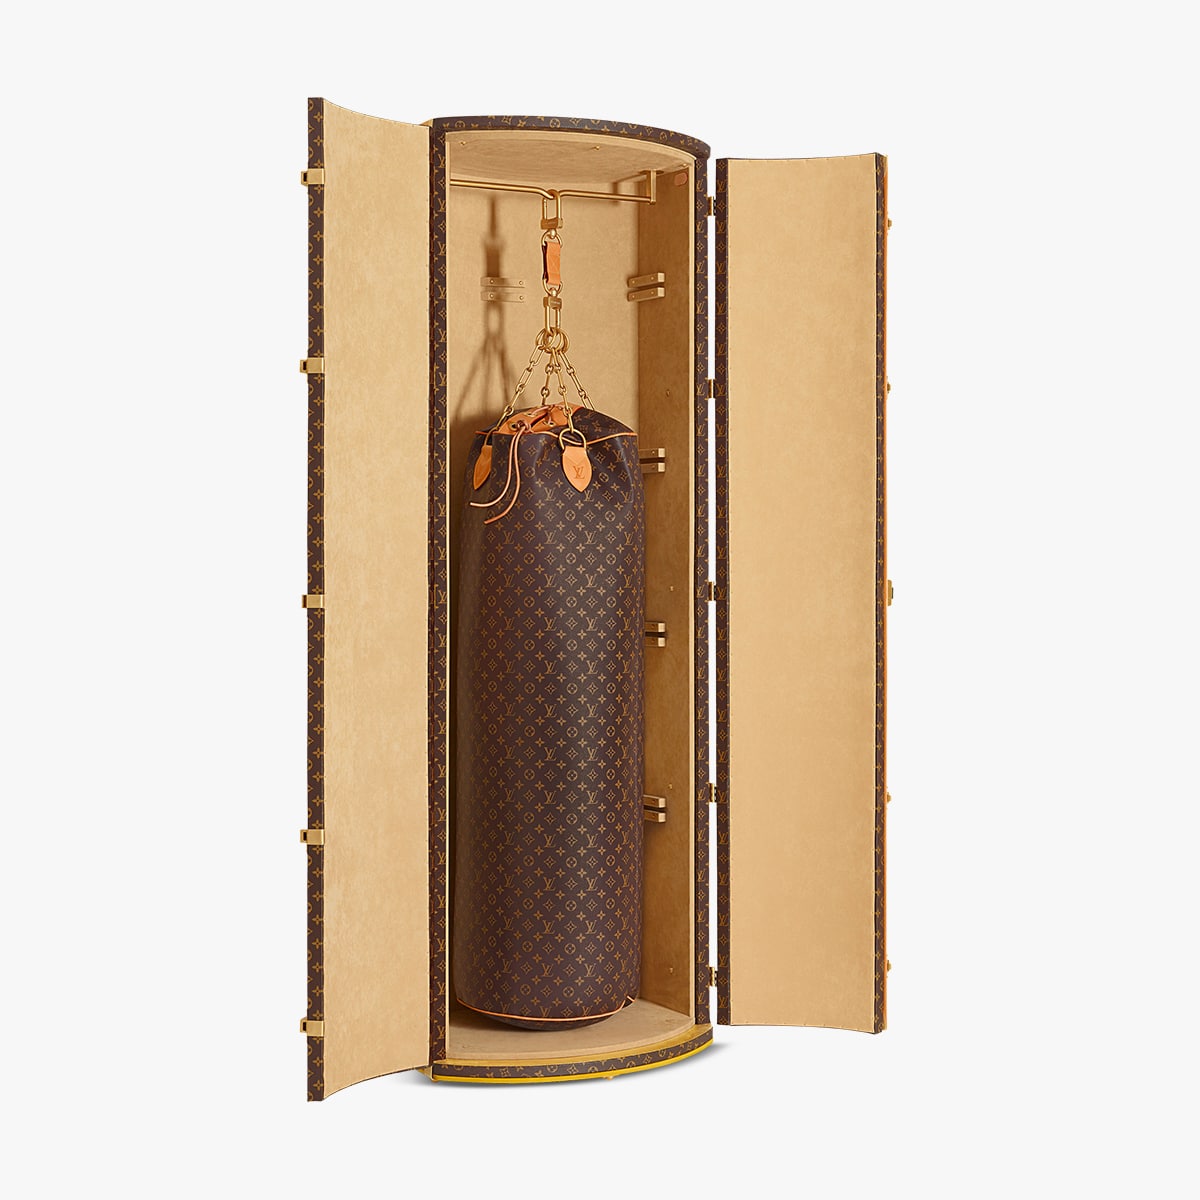 A SET OF TWO: LIMITED EDITION CELEBRATING MONOGRAM ICONOCLAST PUNCHING BAG  PM & CELEBRATING ICON & ICONOCLAST 160 YEARS MONOGRAM BOOK, LOUIS VUITTON,  2014